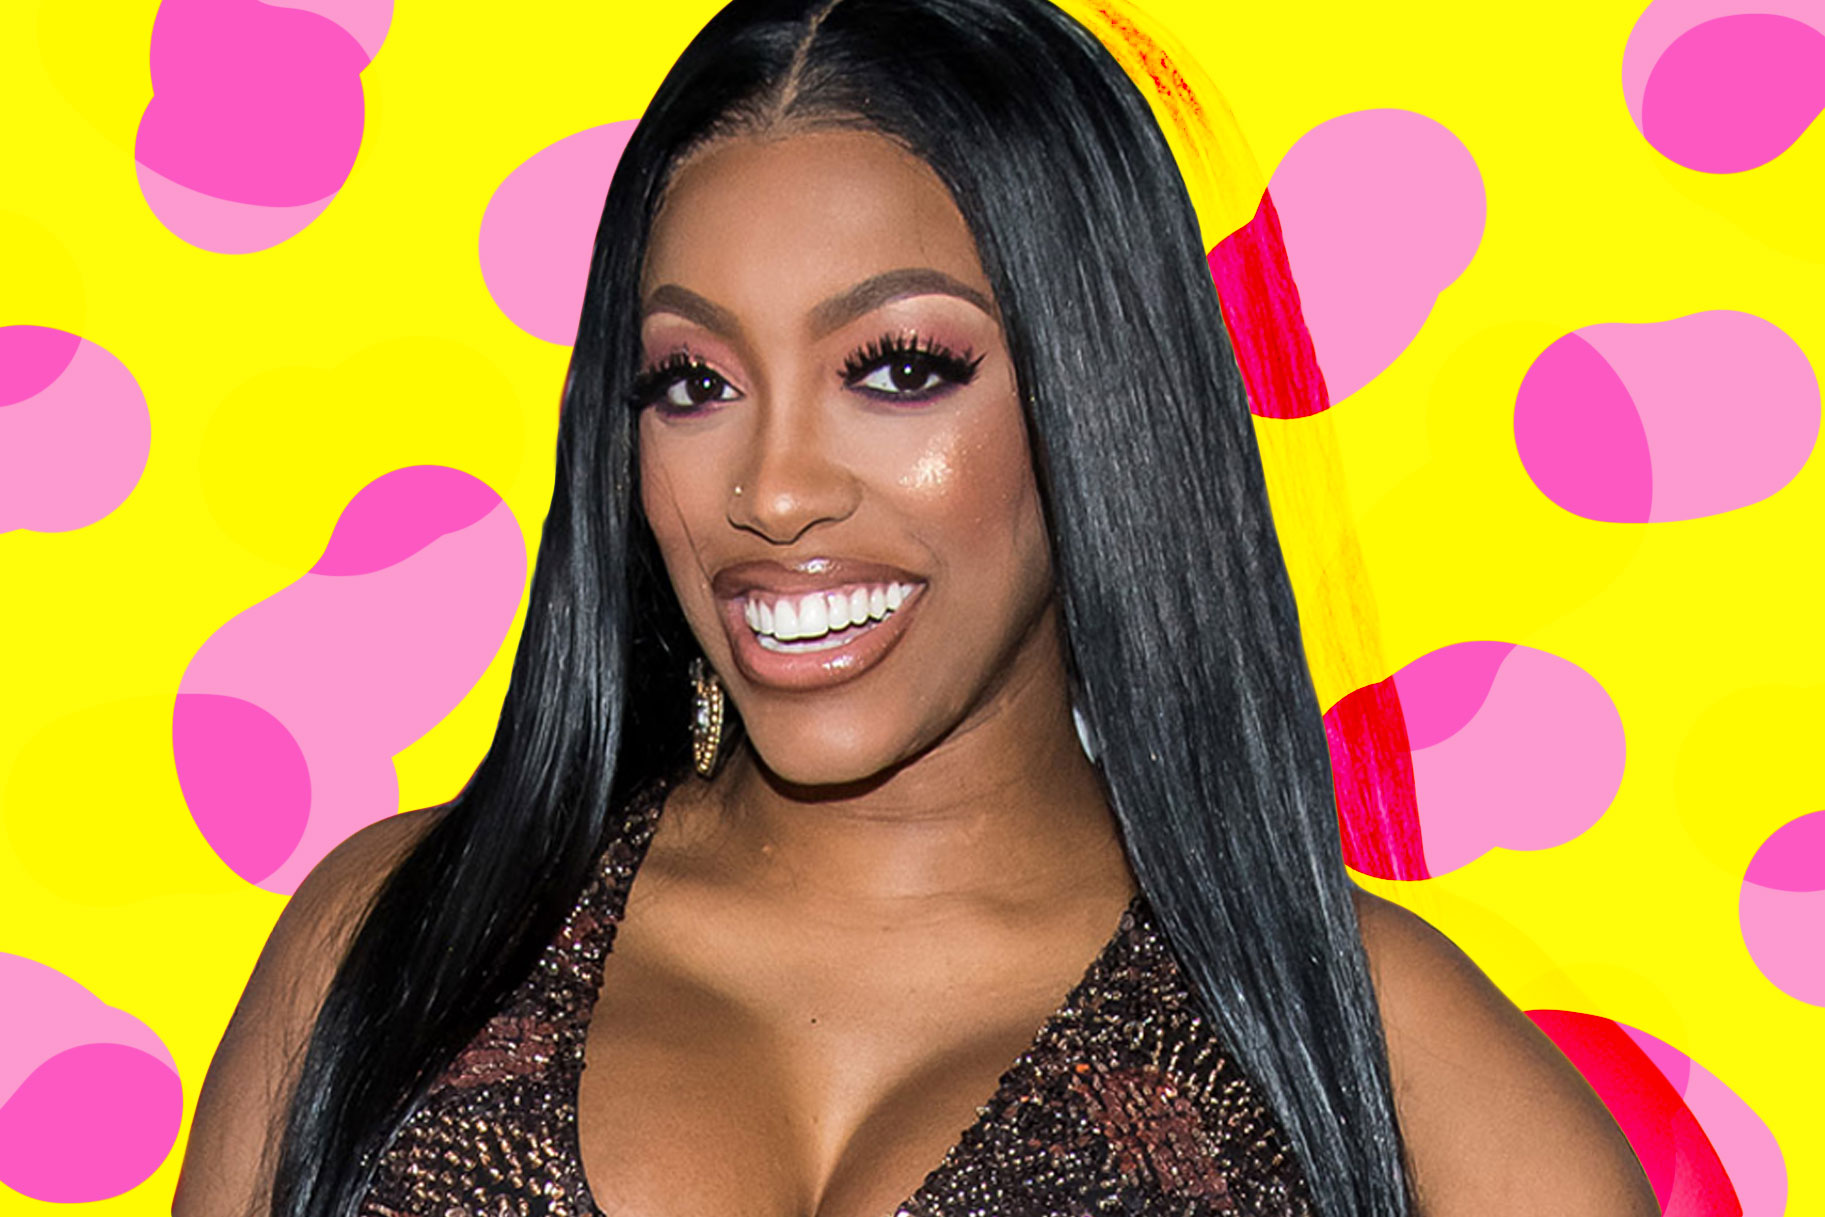 Pregnant Porsha Williams Celebrates Her Changing Body in a Skintight Dress ...